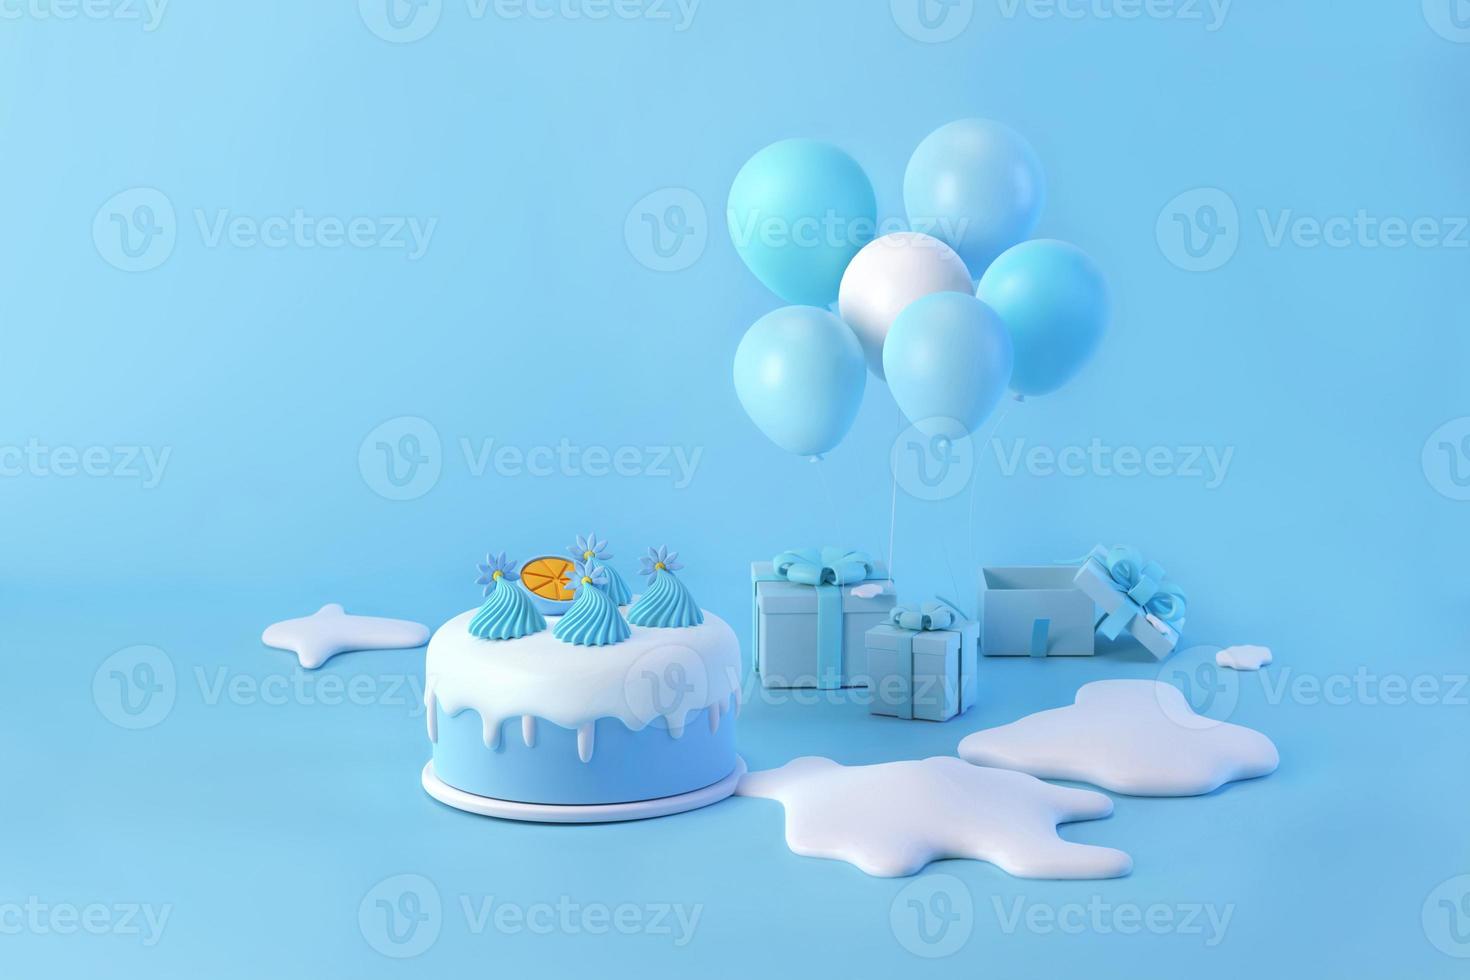 Blue cake birthday, christmas and anniversary with gift box, balloons and white snow 3d illustration for winter season photo